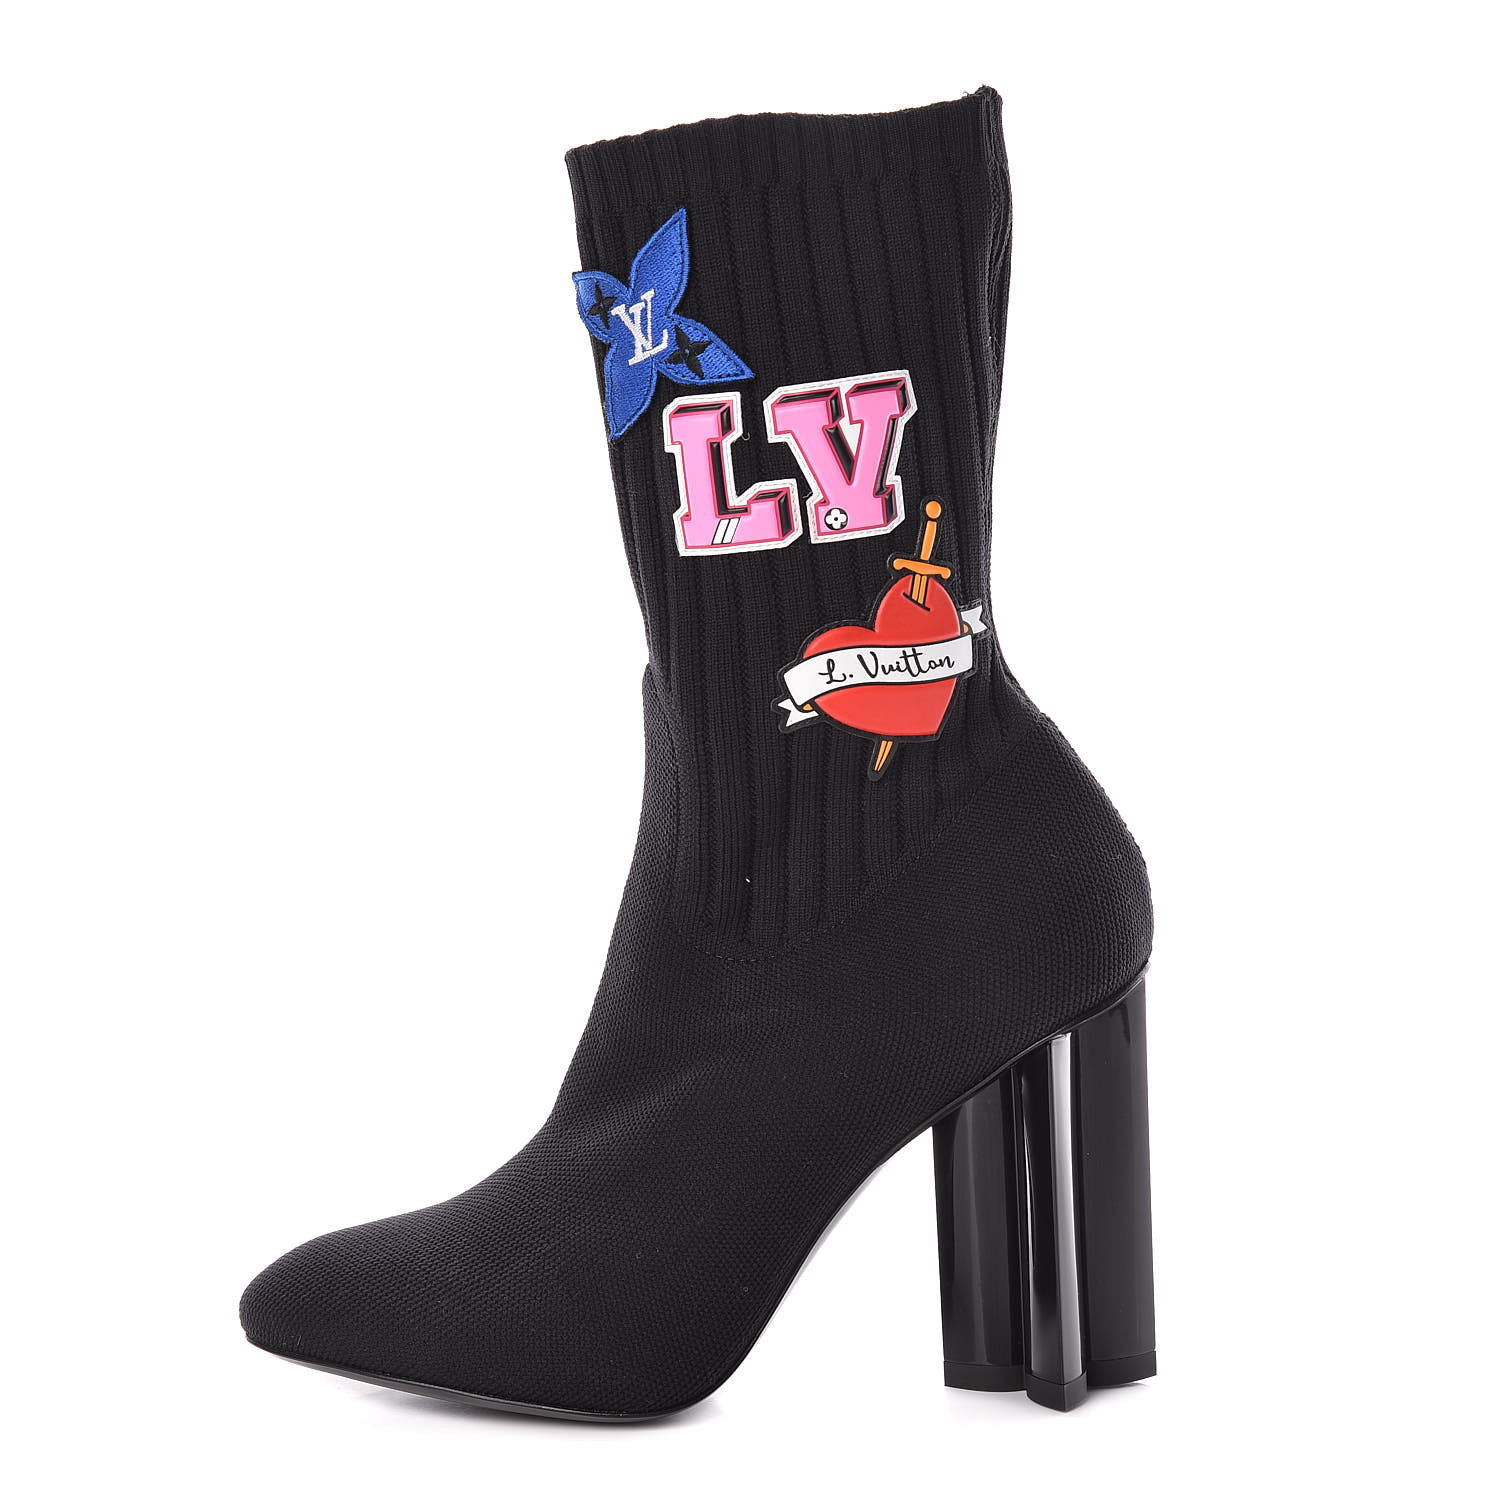 louis vuitton silhouette ankle boot price